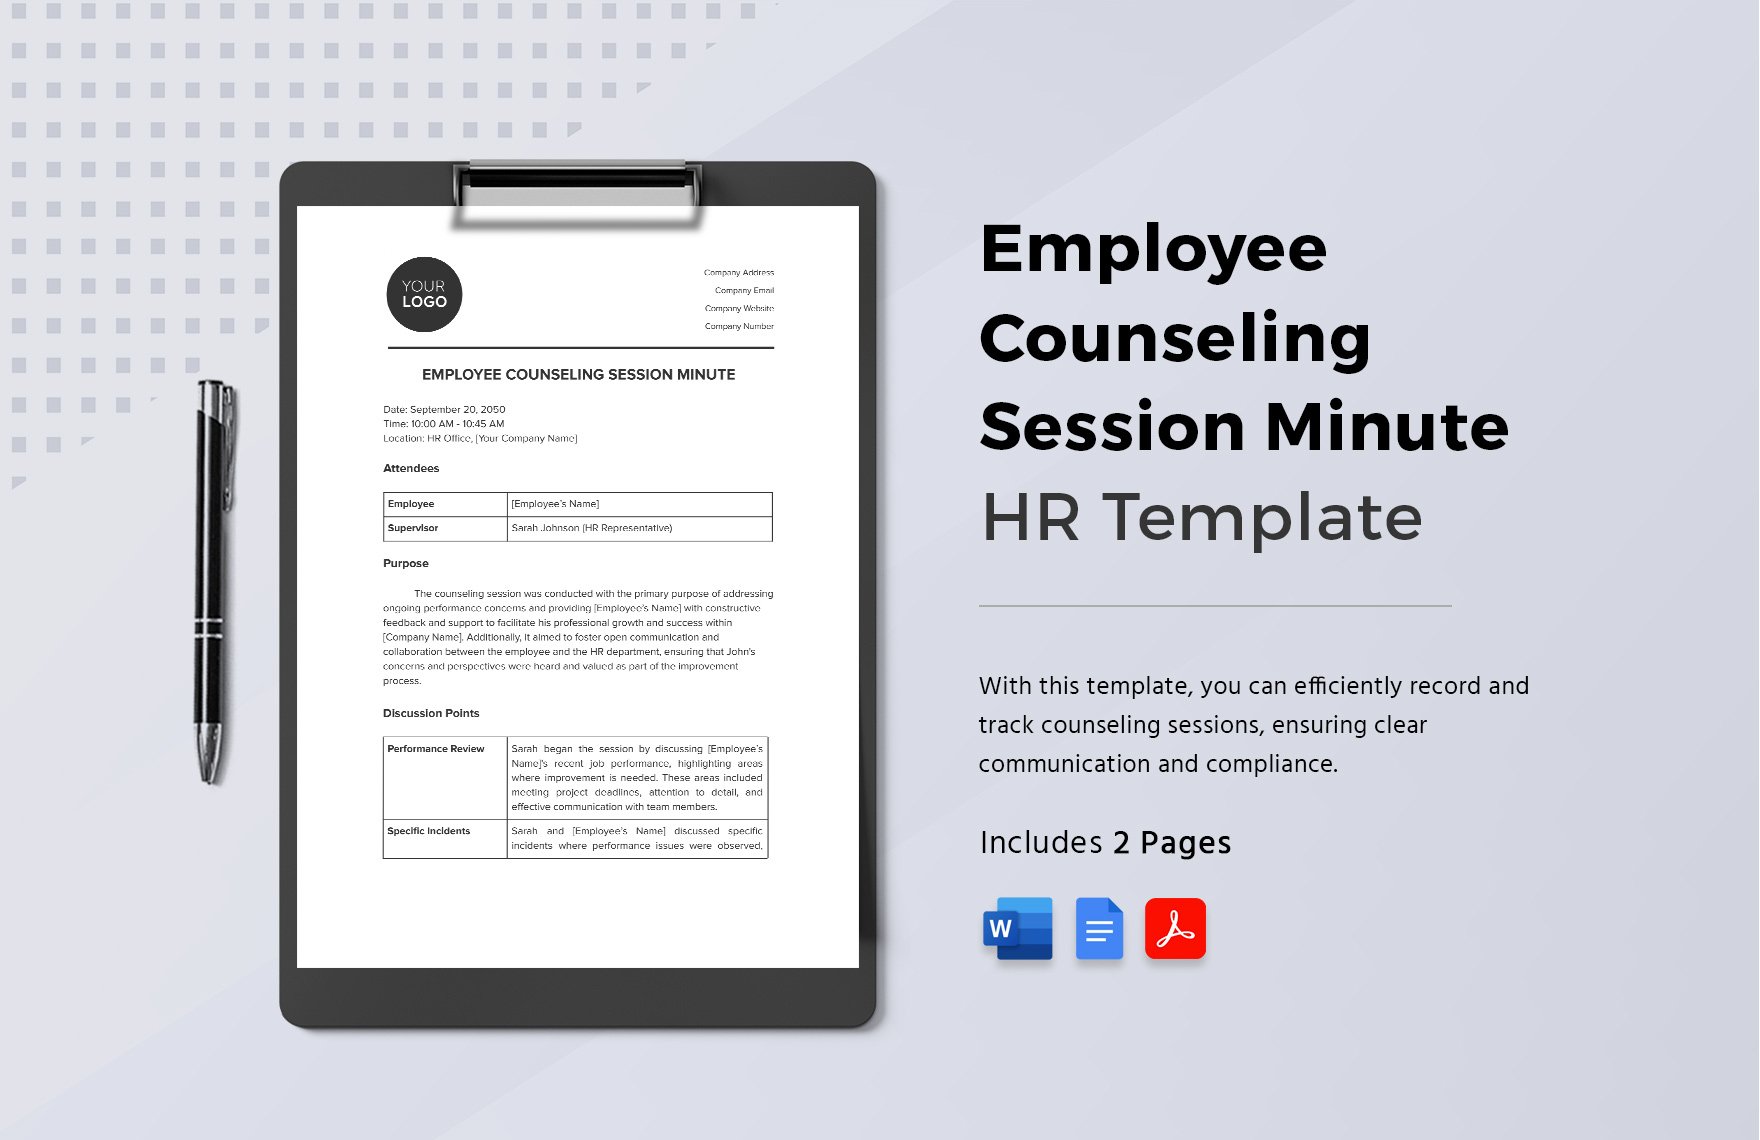 Employee Counseling Session Minute HR Template